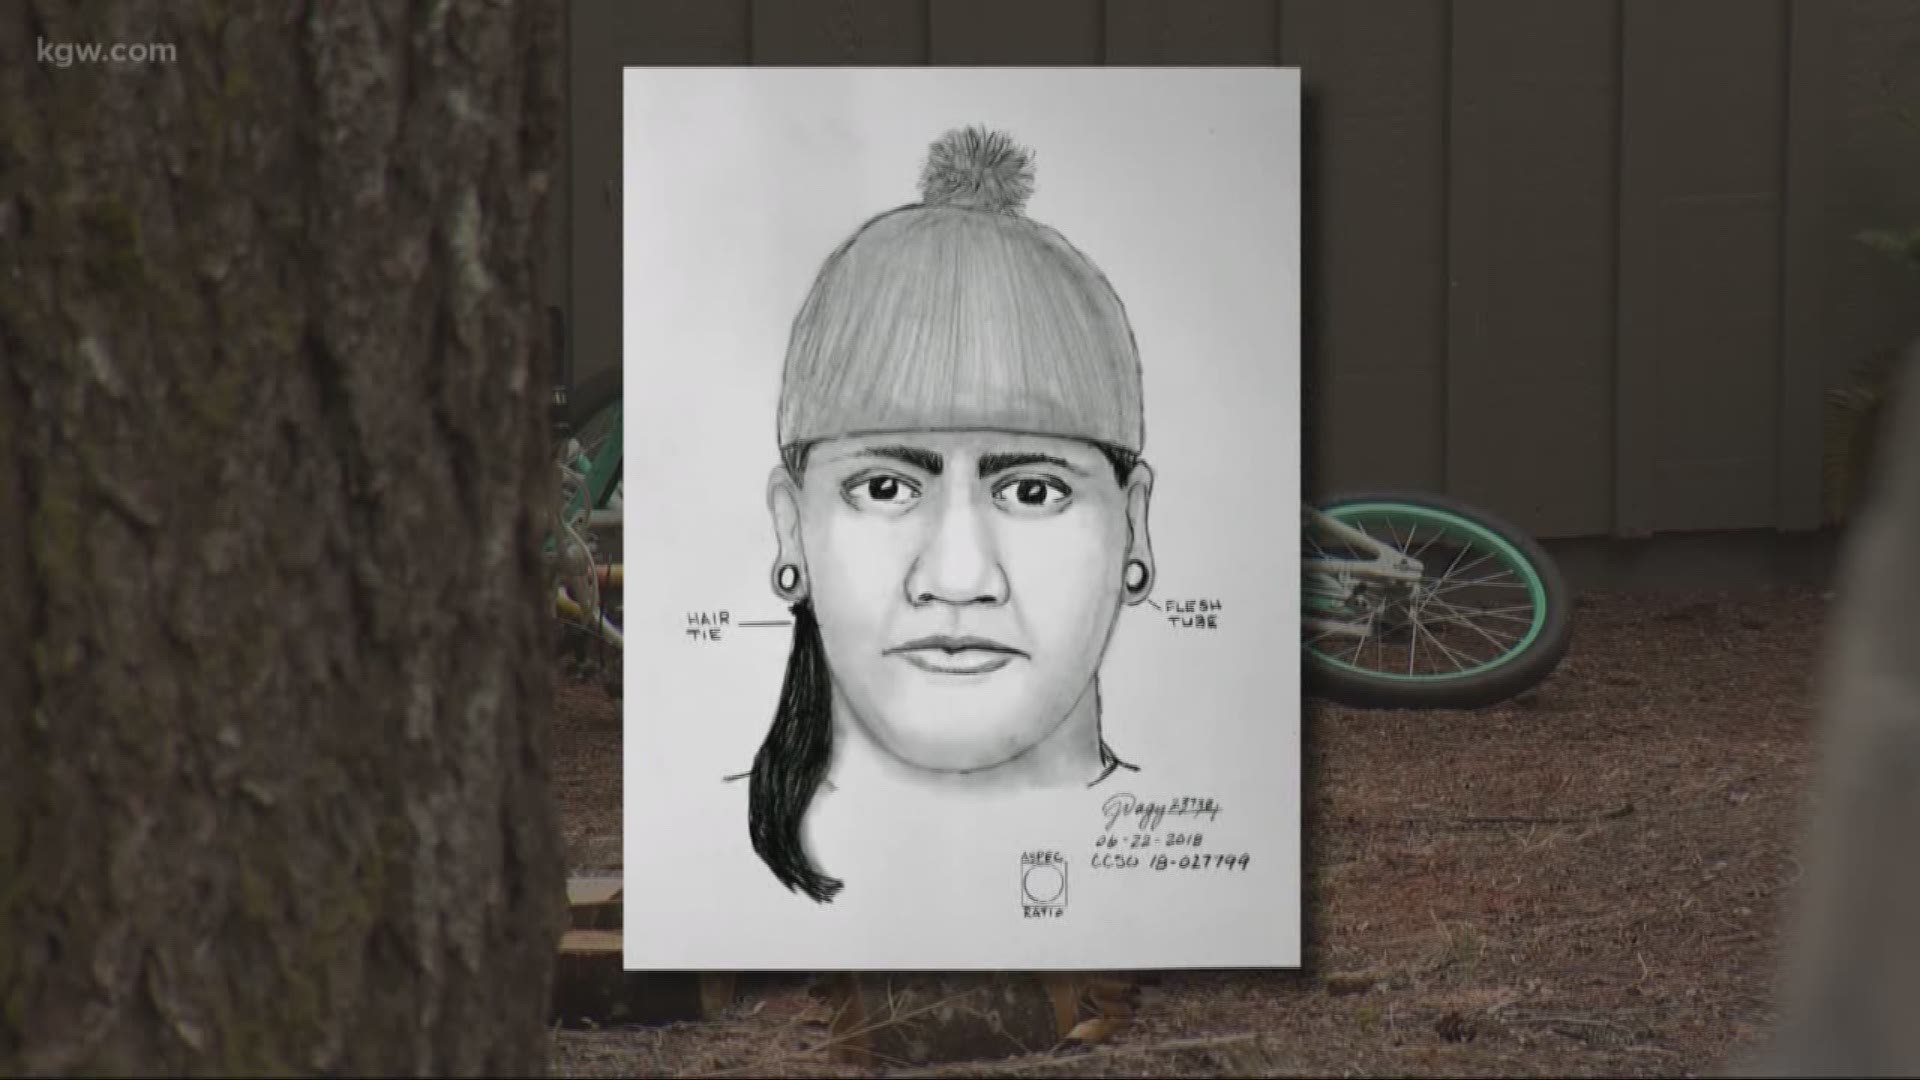 Deputies are searching for a man who they say tried to kidnap a 10-year-old girl from the Welches area in rural Clackamas County on Friday.